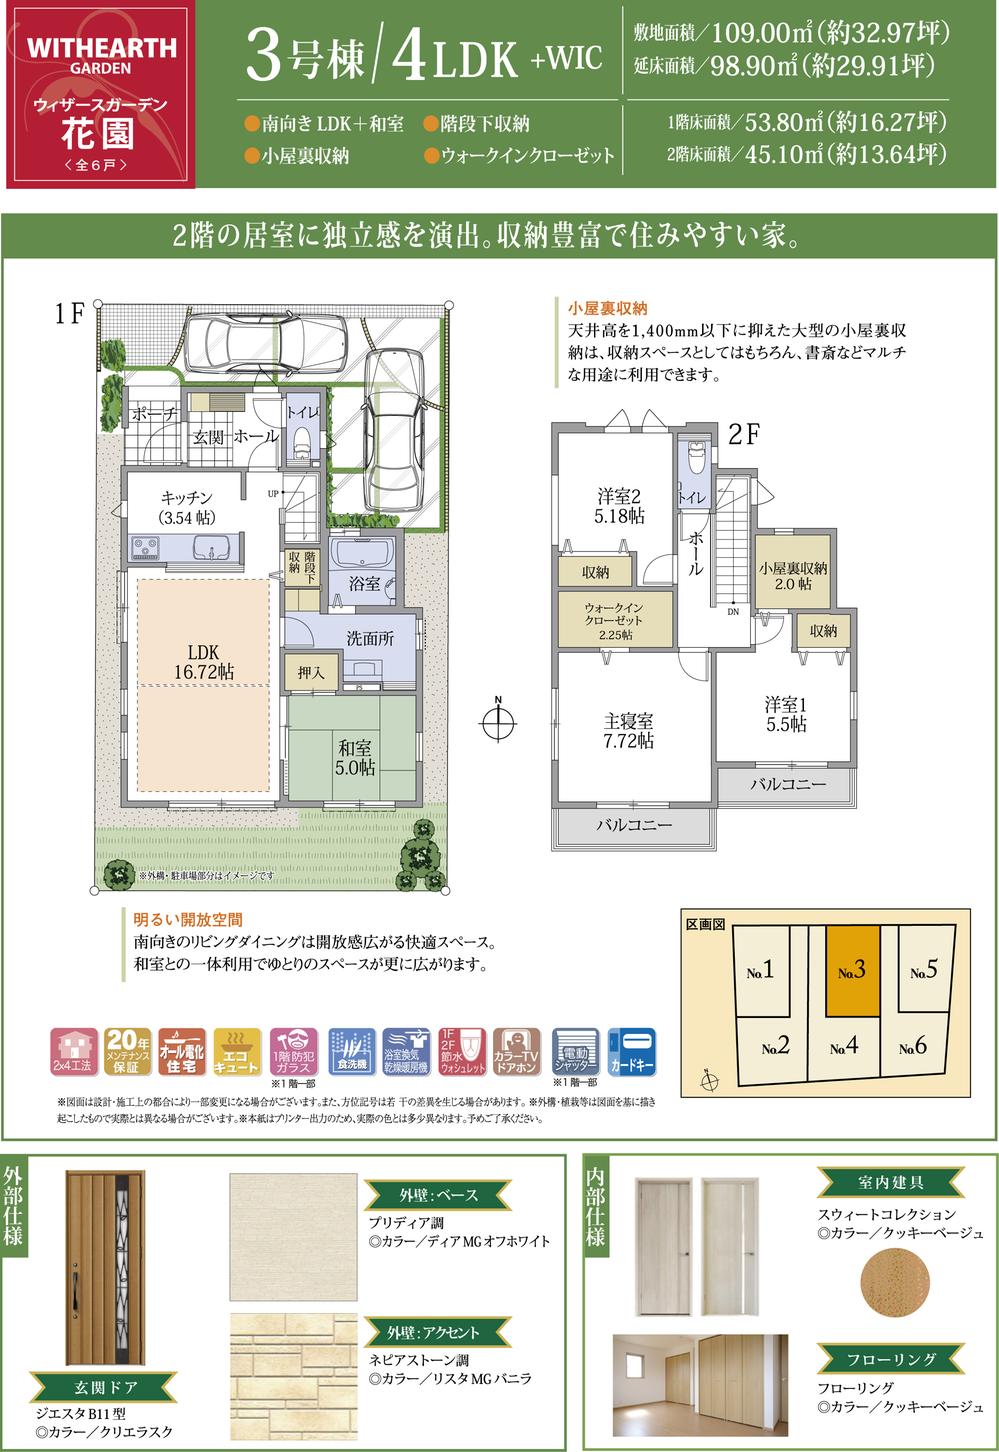 Floor plan. Condominiums will complete the new Showa proposes a 10-minute walk to Shin-Kemigawa Station! !